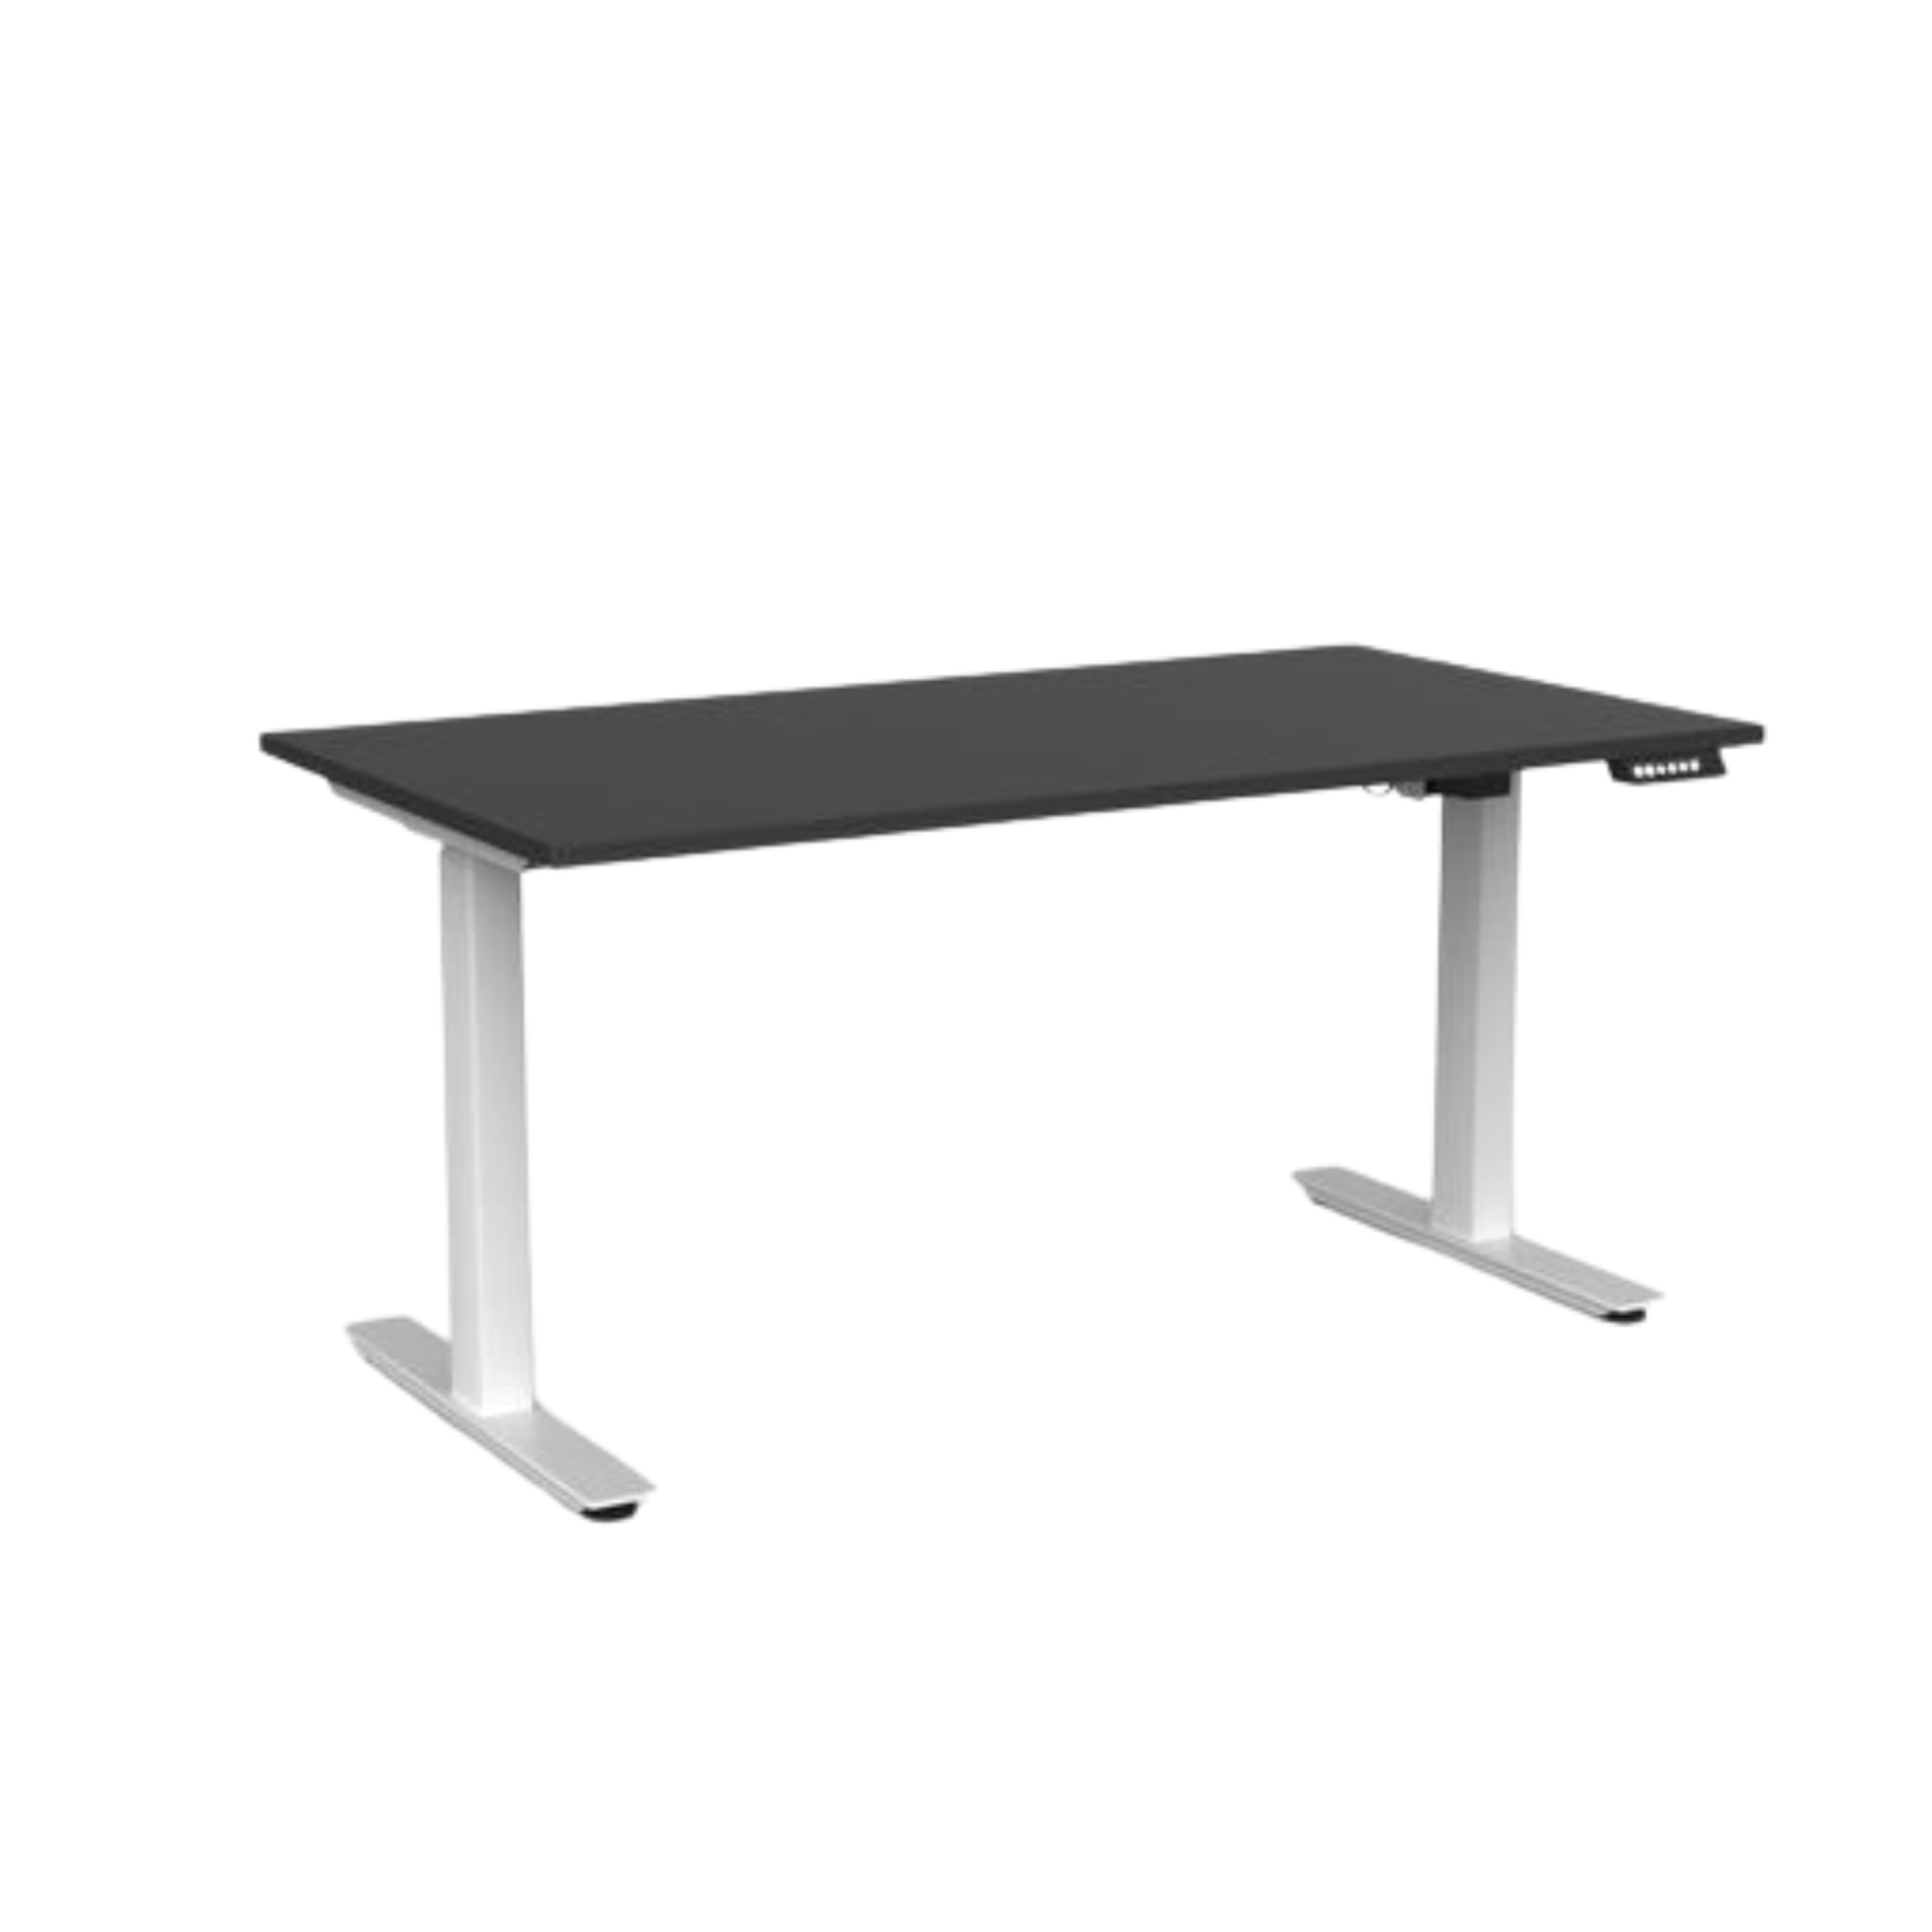 Agile 2 electric sit to stand desk with white frame and black top